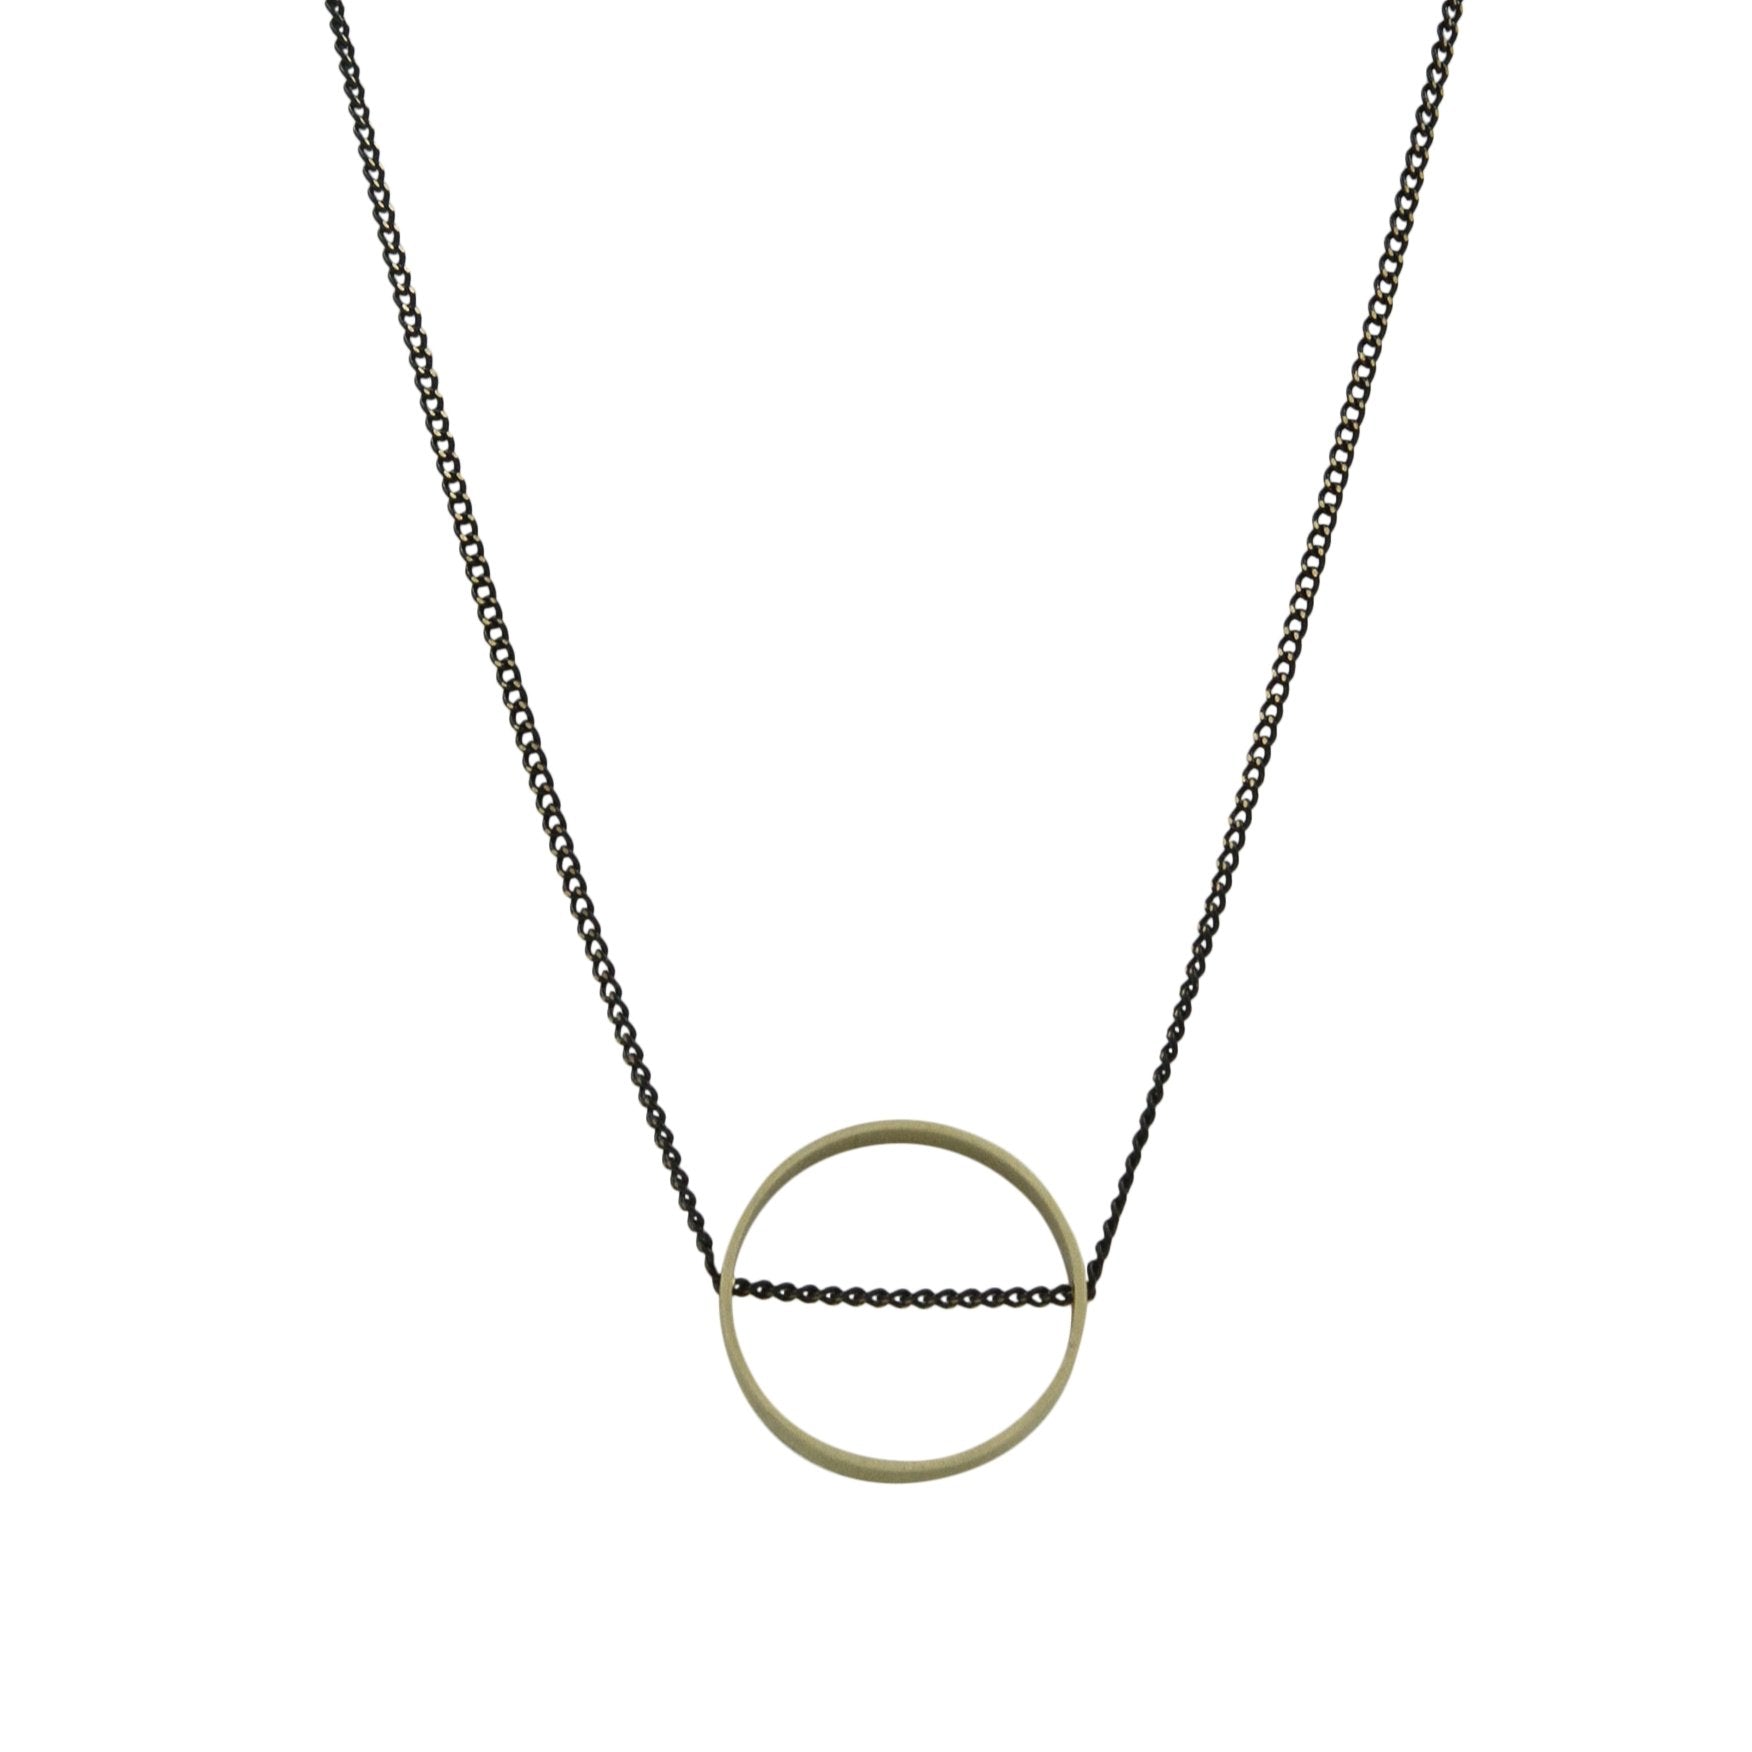 2 Tone Intersected Circle Necklace - Sunday Girl by Amy DiLamarraNecklace